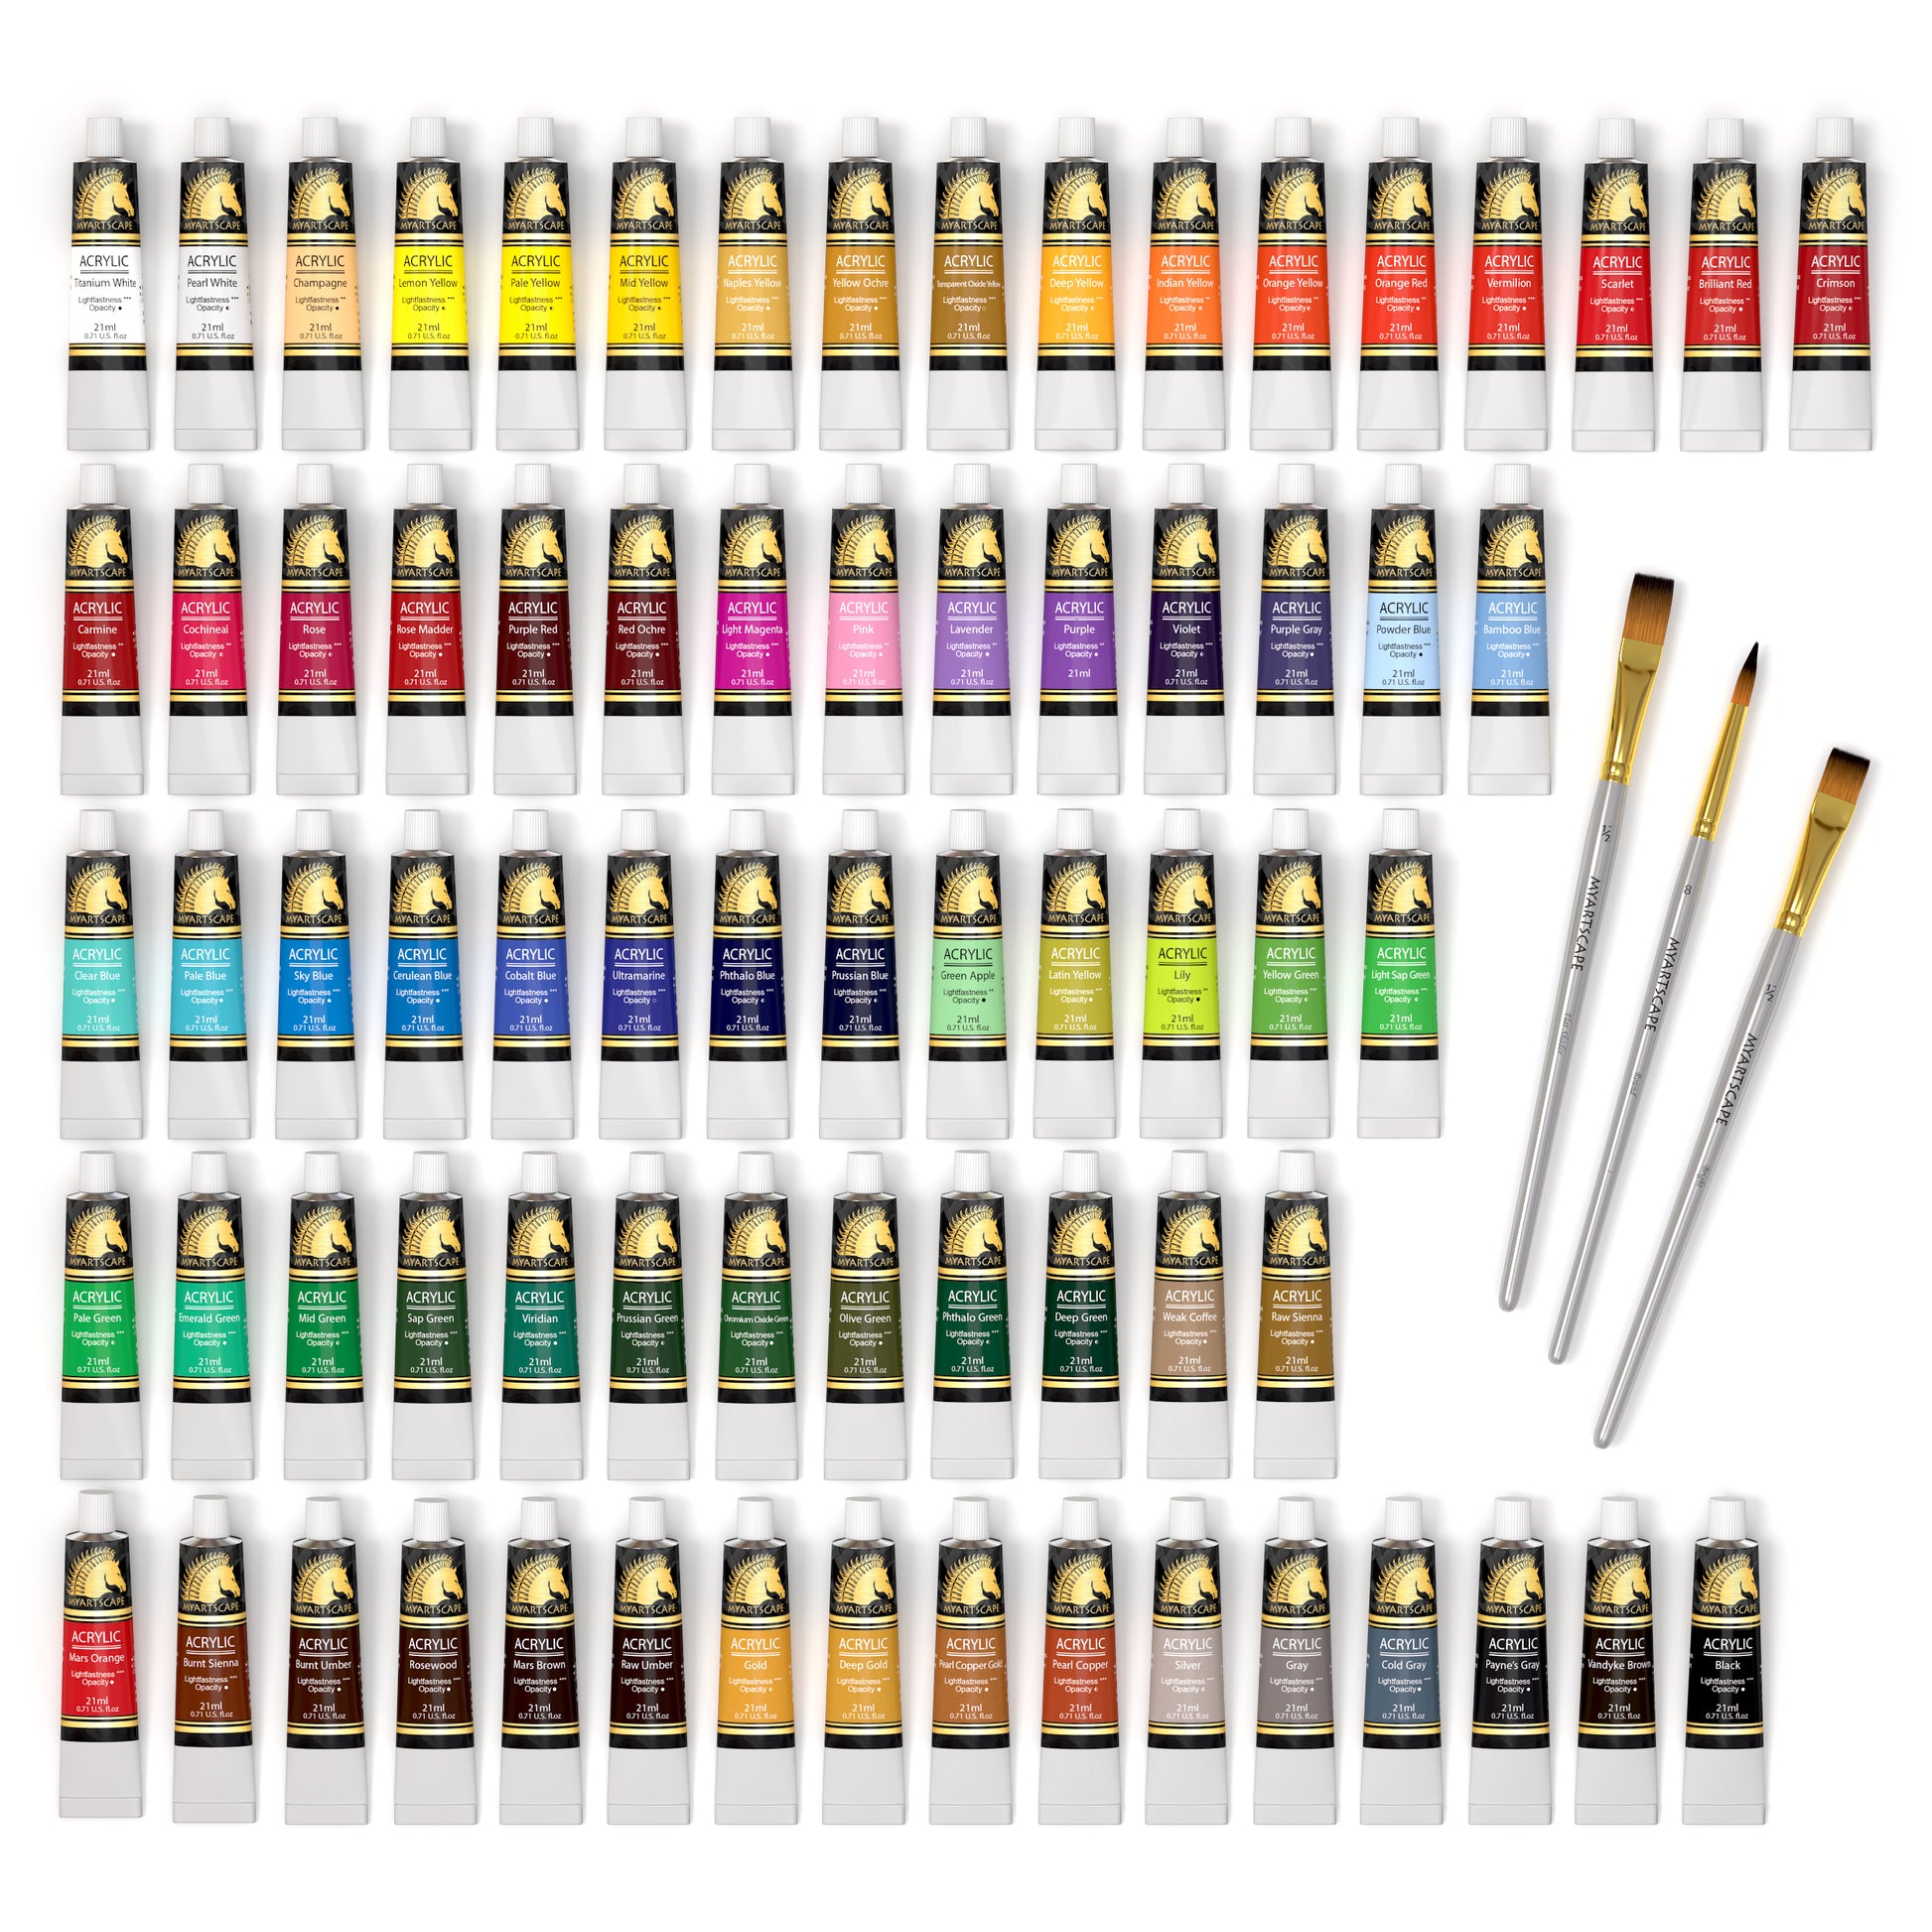 Acrylic Paint Tubes, 75 mL, Assorted Colors, 10 Count - SAR230299